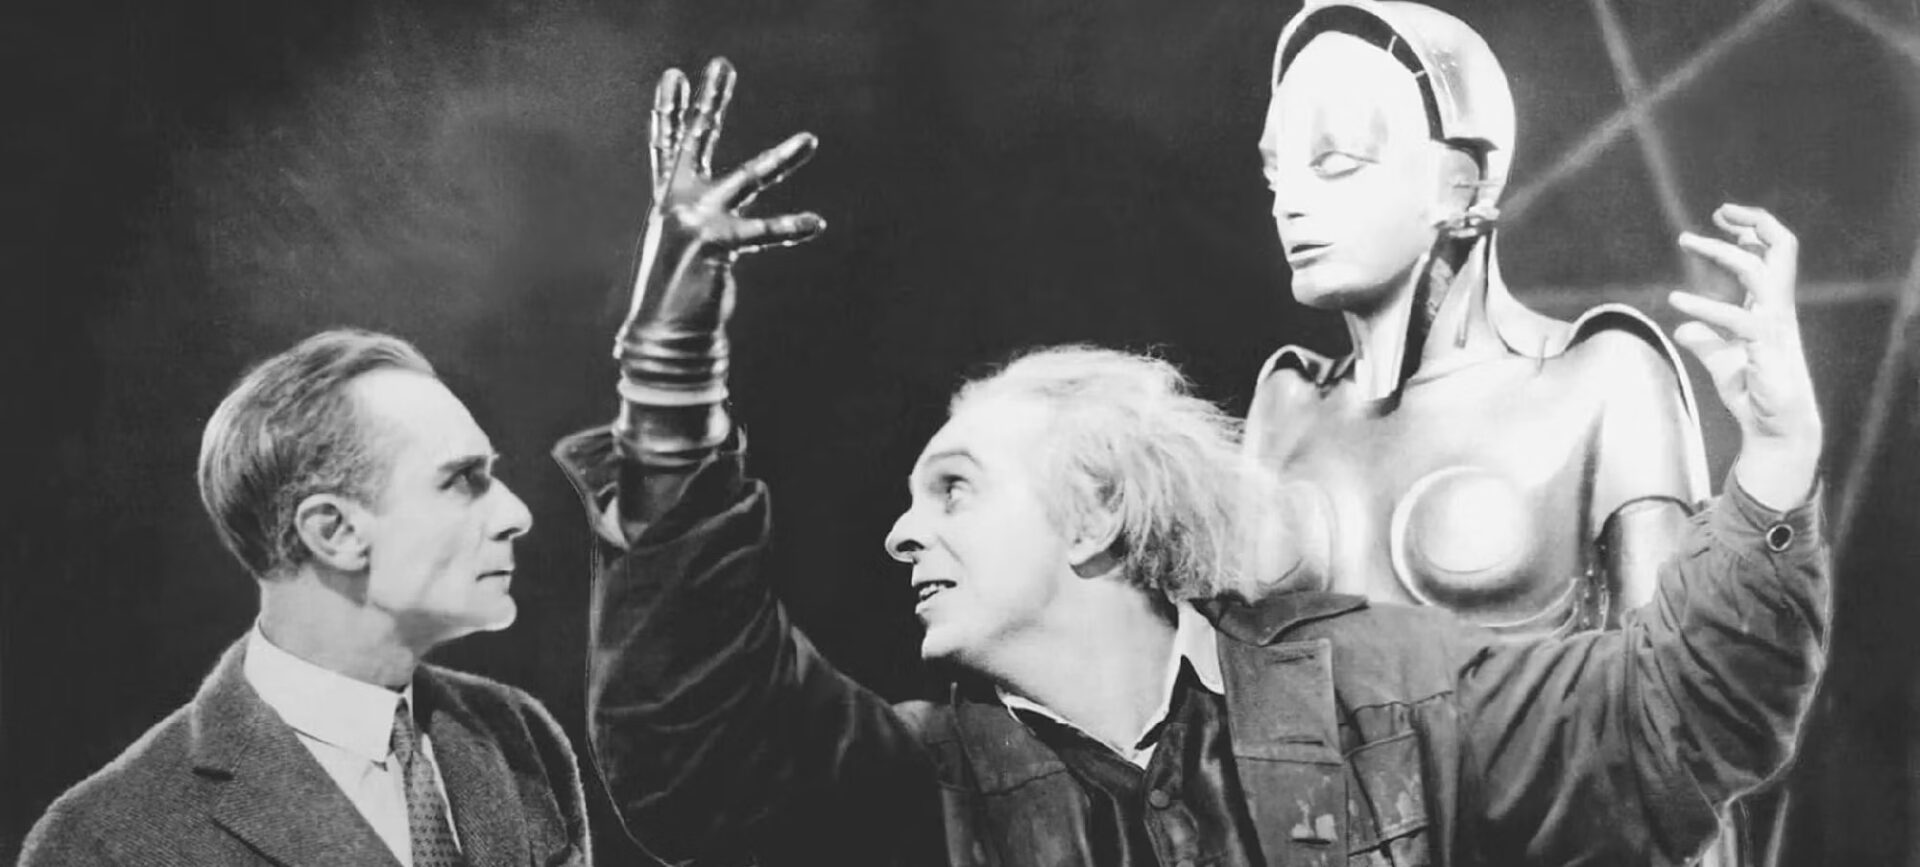 black and white film still with two men, one with white hair and hand raised, in front of a mannequin